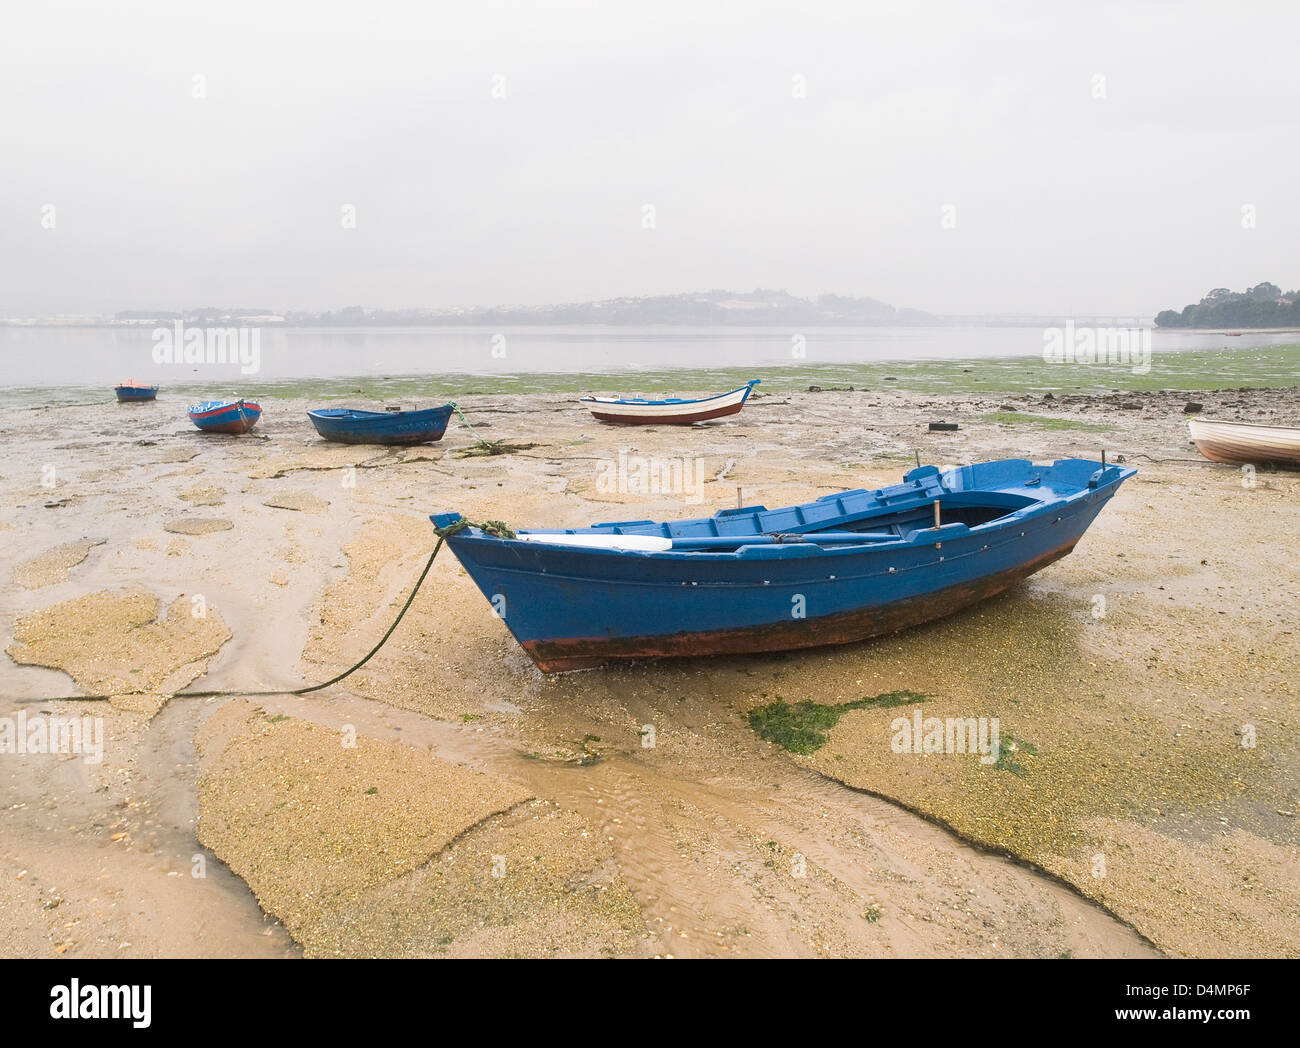 Set of boats stranded on the sand at low tide. The picture was taken in Ferrol, Galicia, Spain. Stock Photo